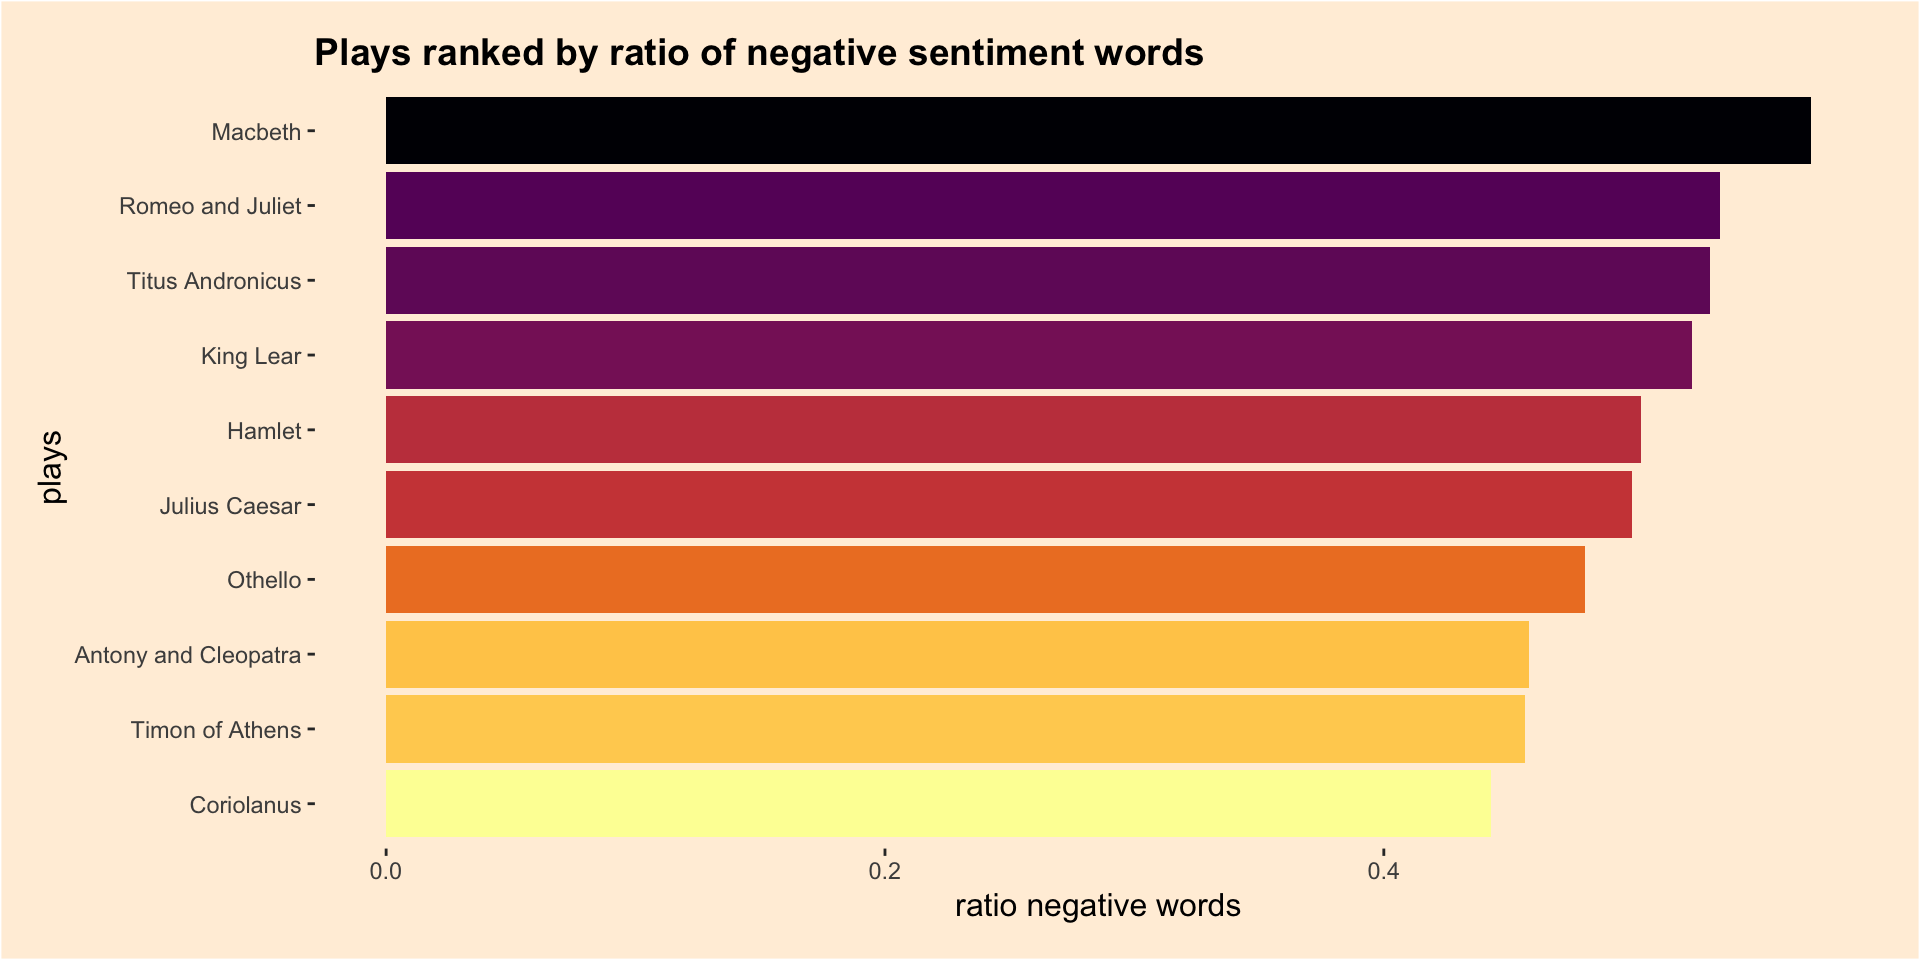 Plays ranked by ratio of negative sentiment words